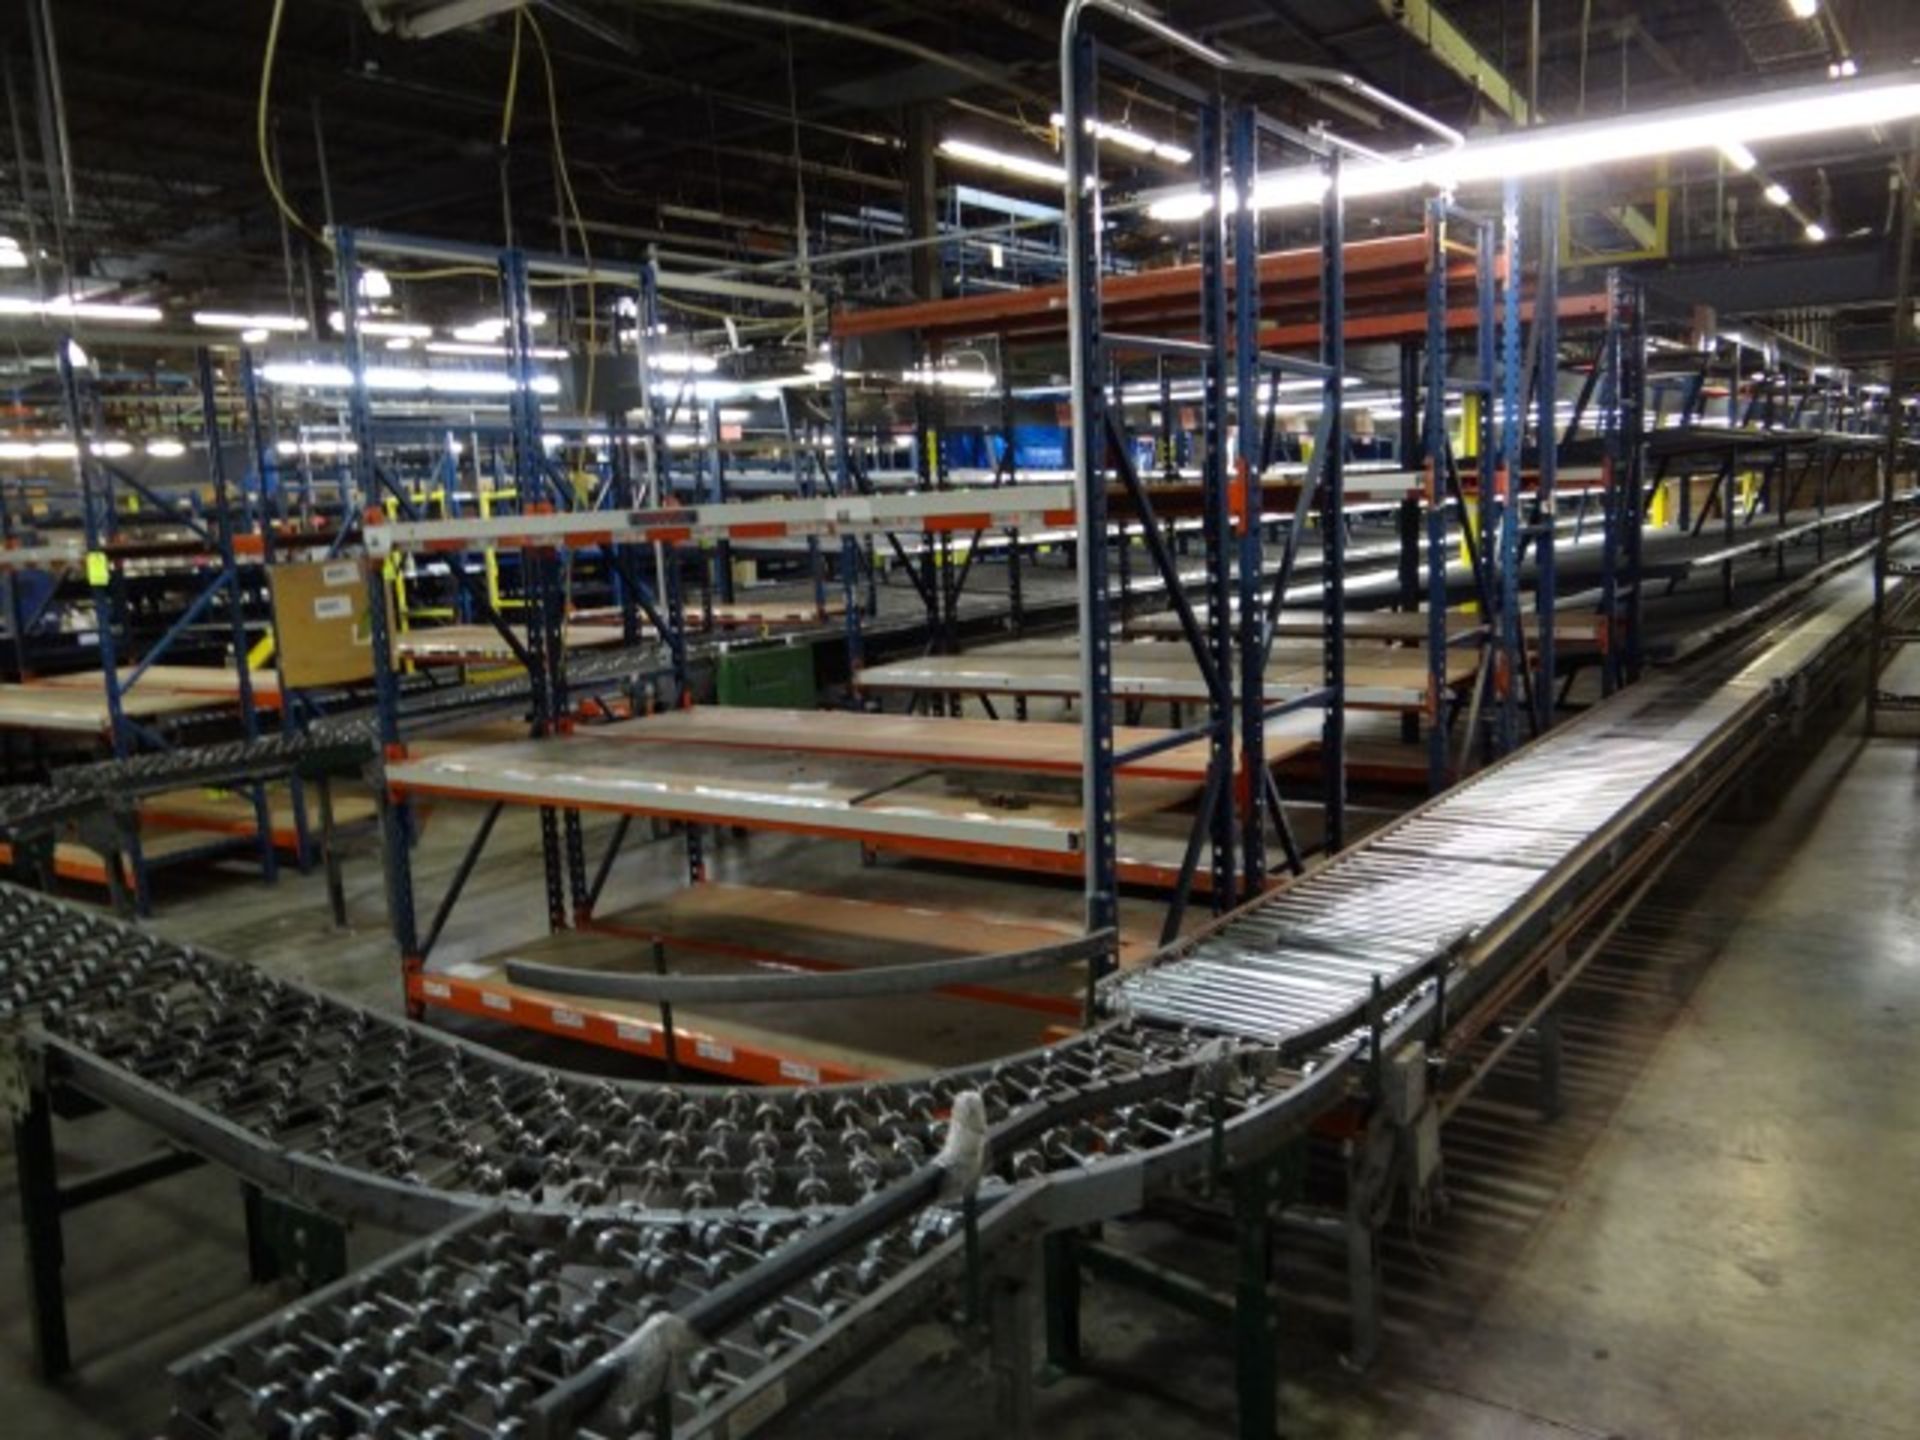 Tech King Cigarette Pick to Light System with 6 Pick Stations, Conveyors, Flow Racks, Box Tram and - Image 53 of 57